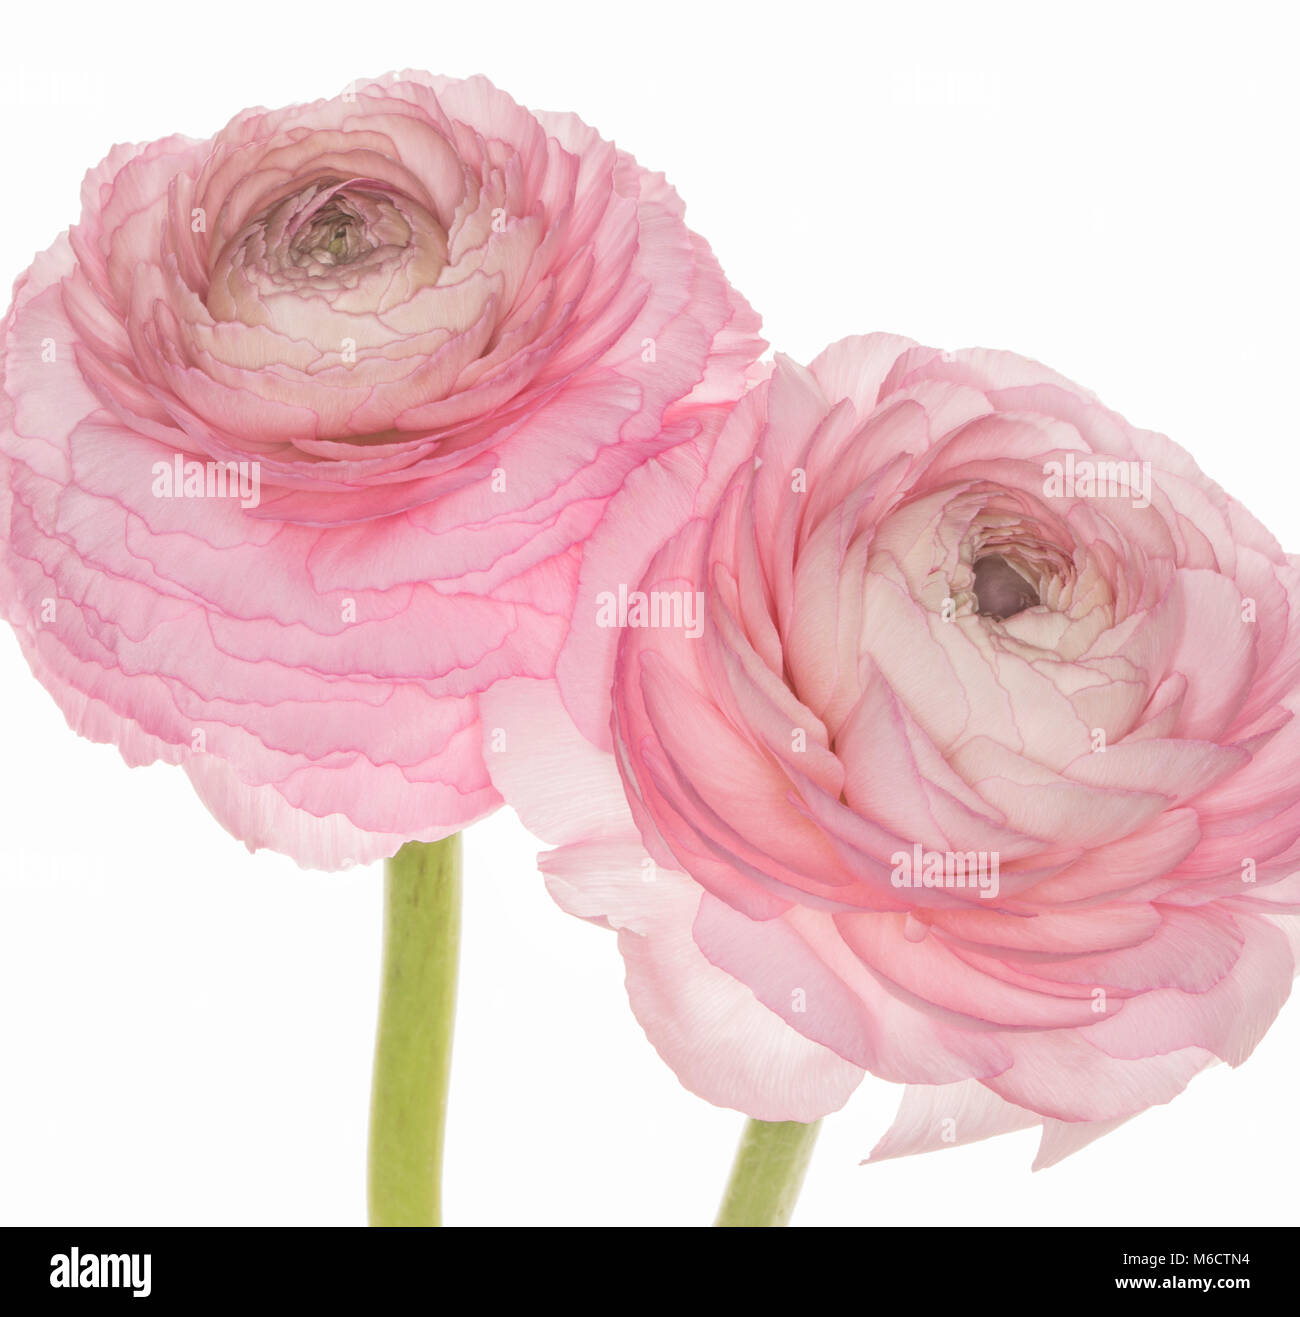 Pink Ranunculus asiaticus isolated on a white background Stock Photo